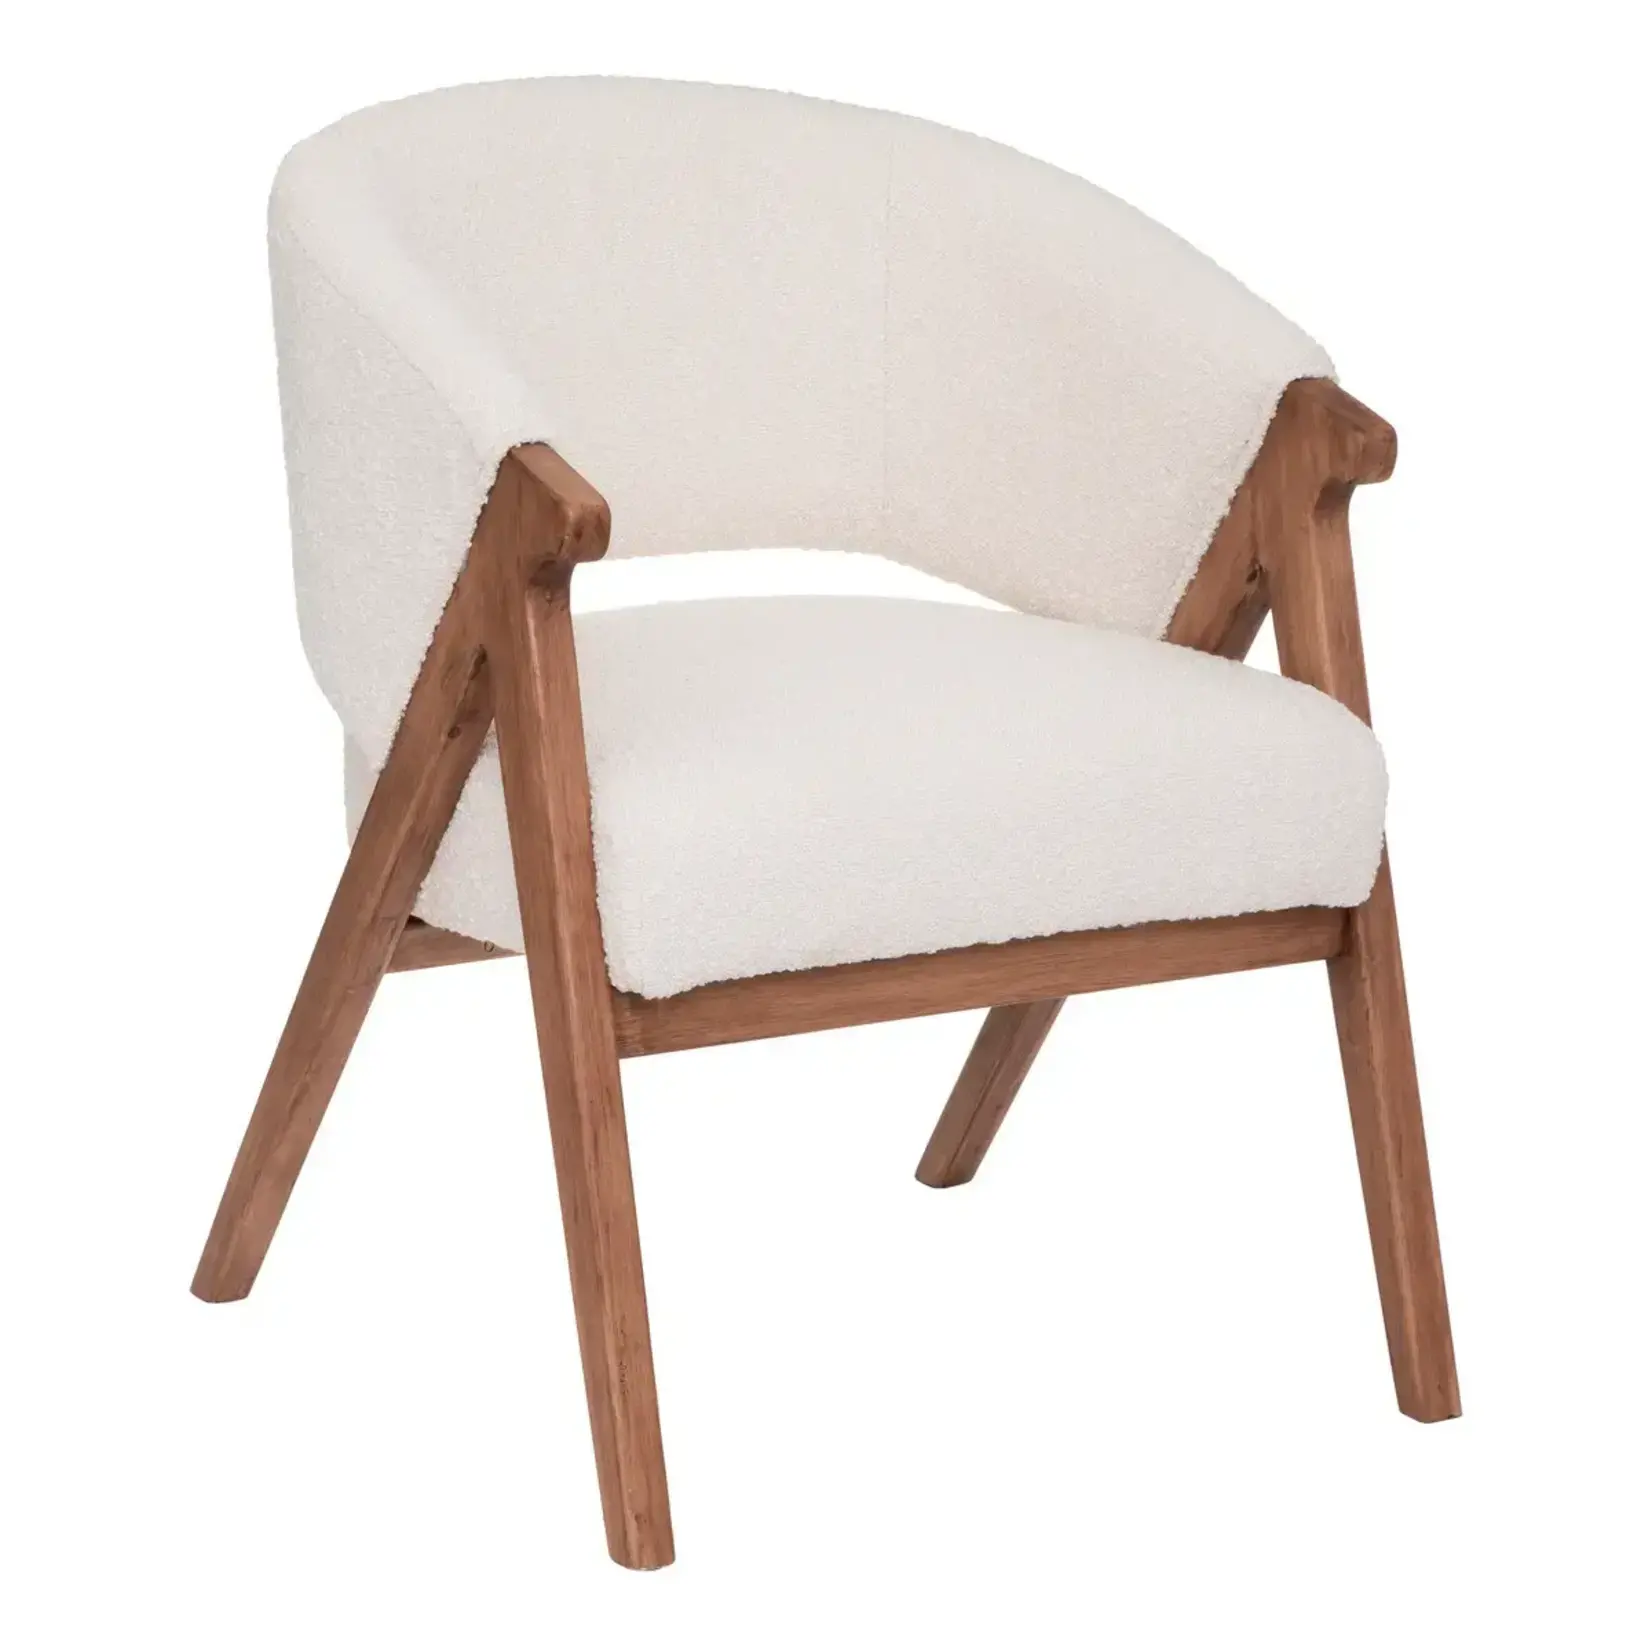 Curly white chair wood